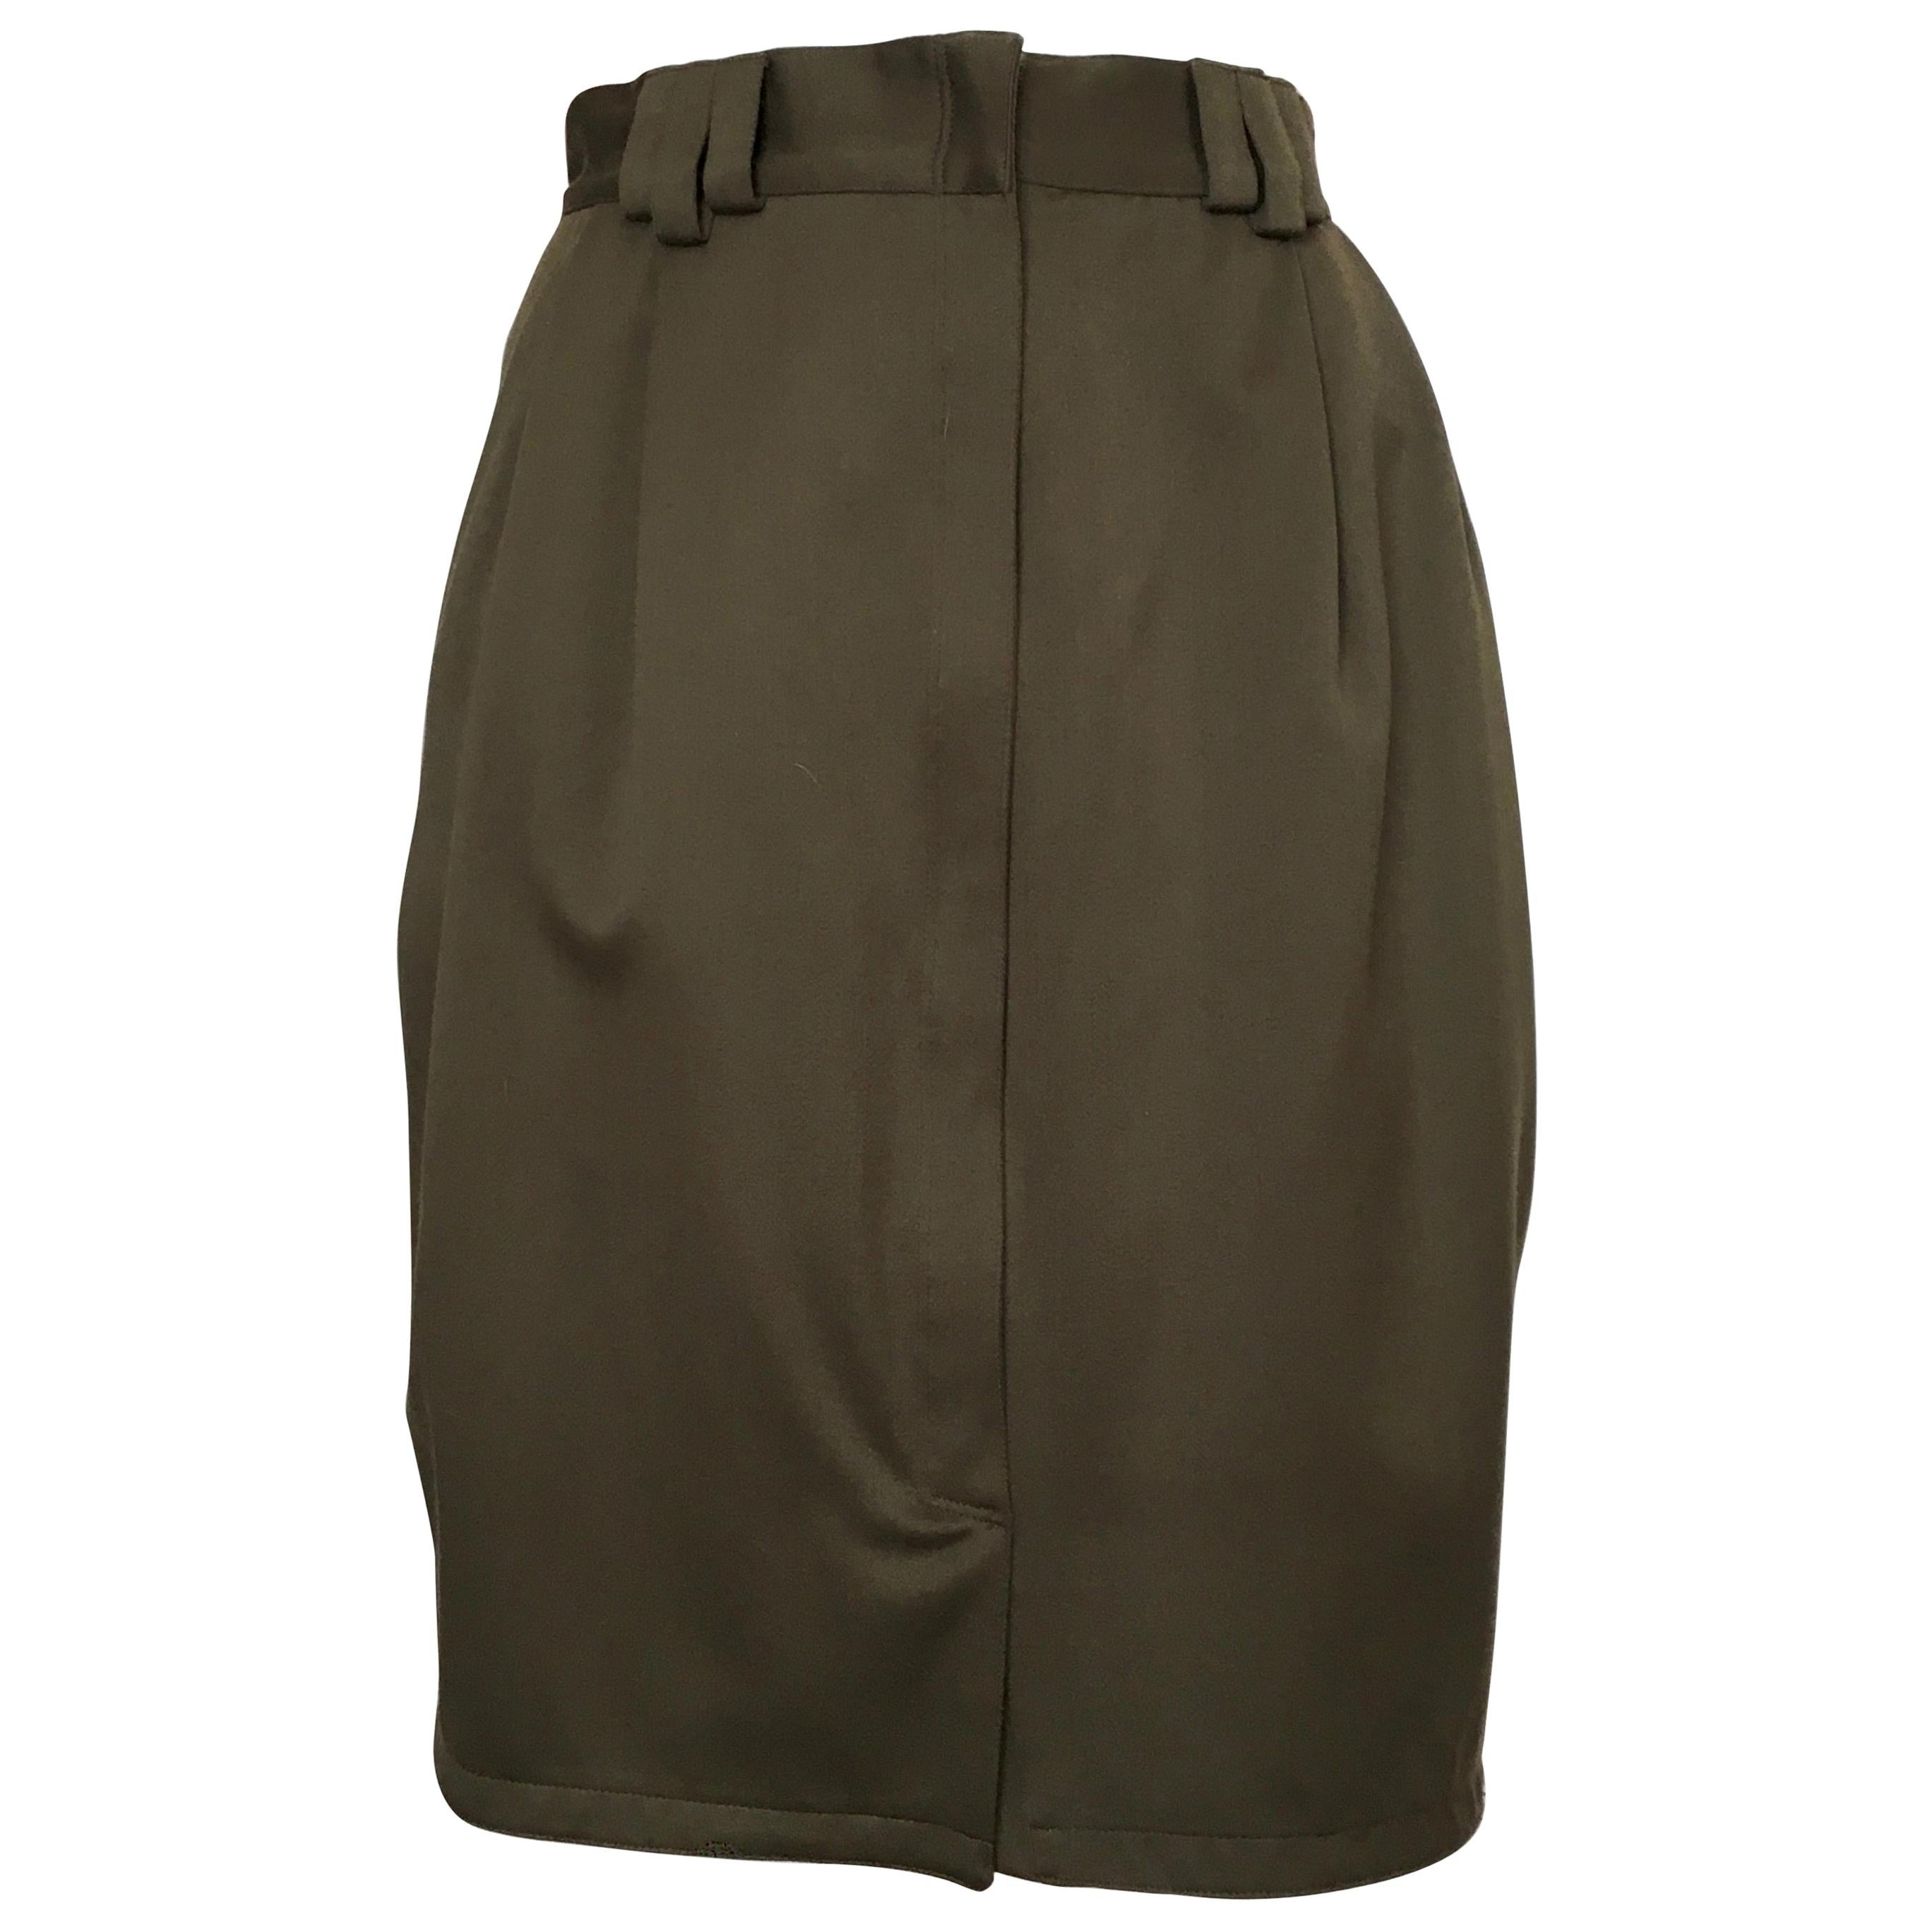 Gianni Versace 1980s Olive Wool Skirt with Pockets Size 6. For Sale